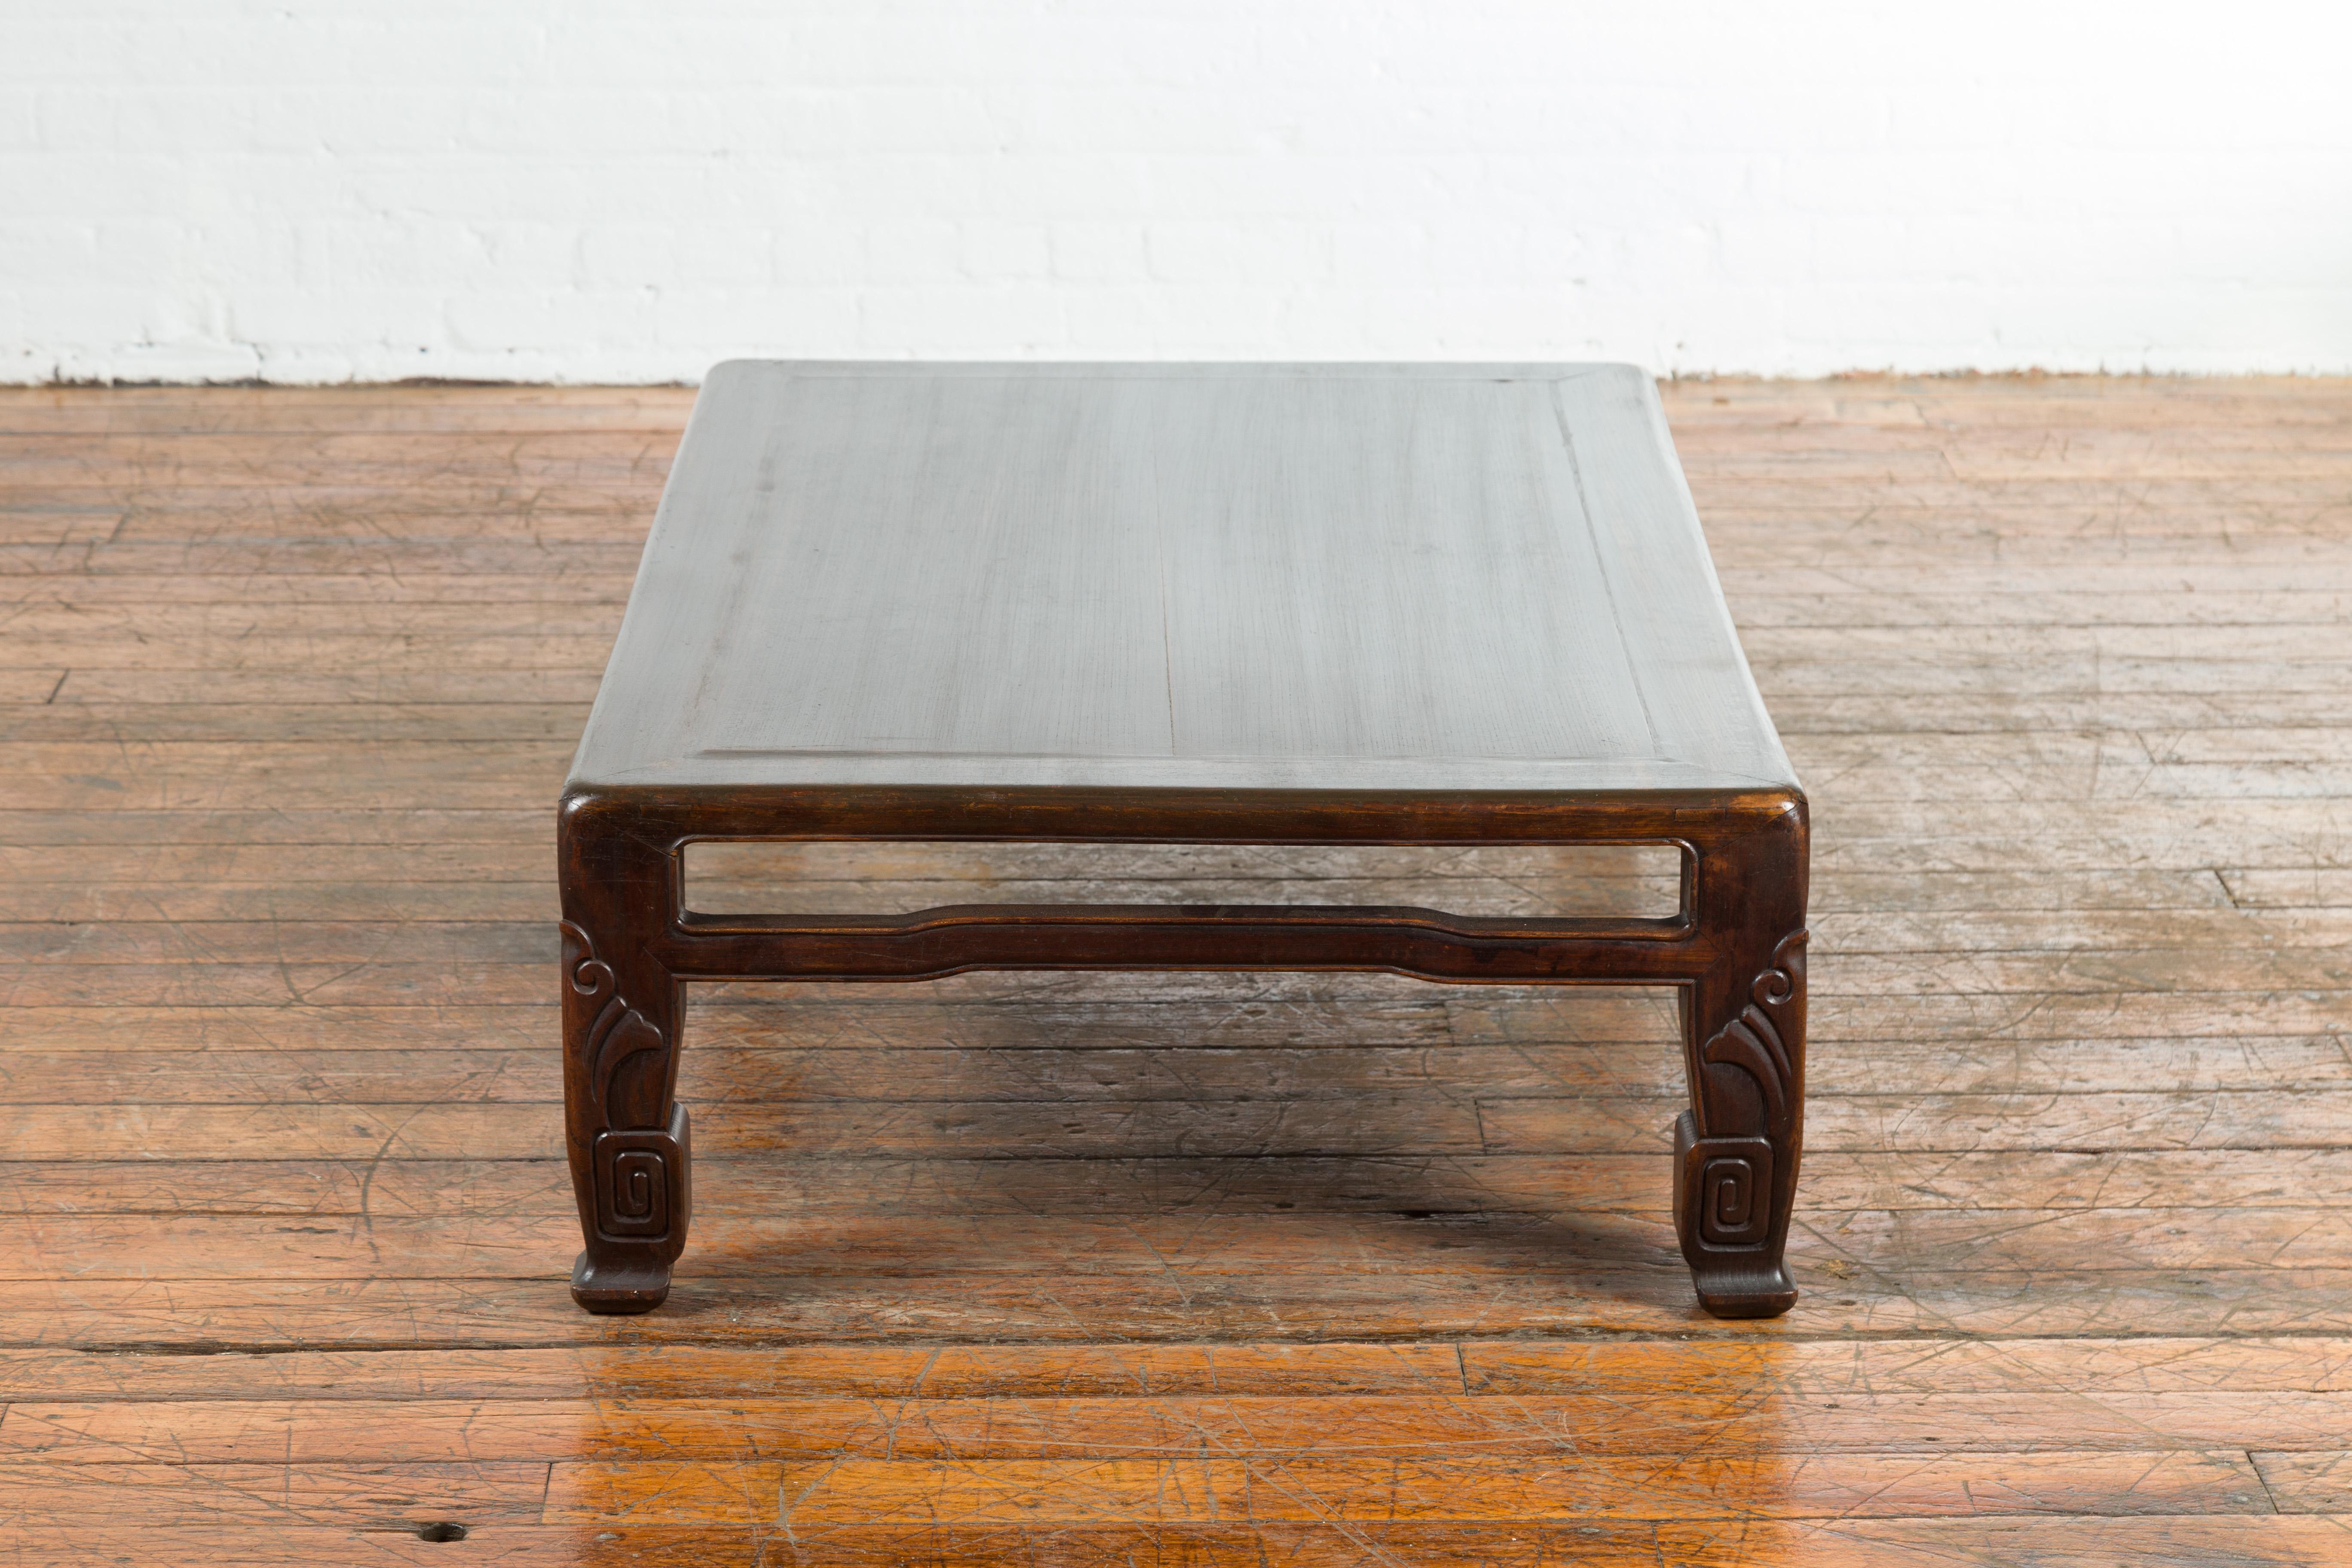 Chinese Antique Elmwood Coffee Table with Scrolling Feet and Humpback Stretchers For Sale 4